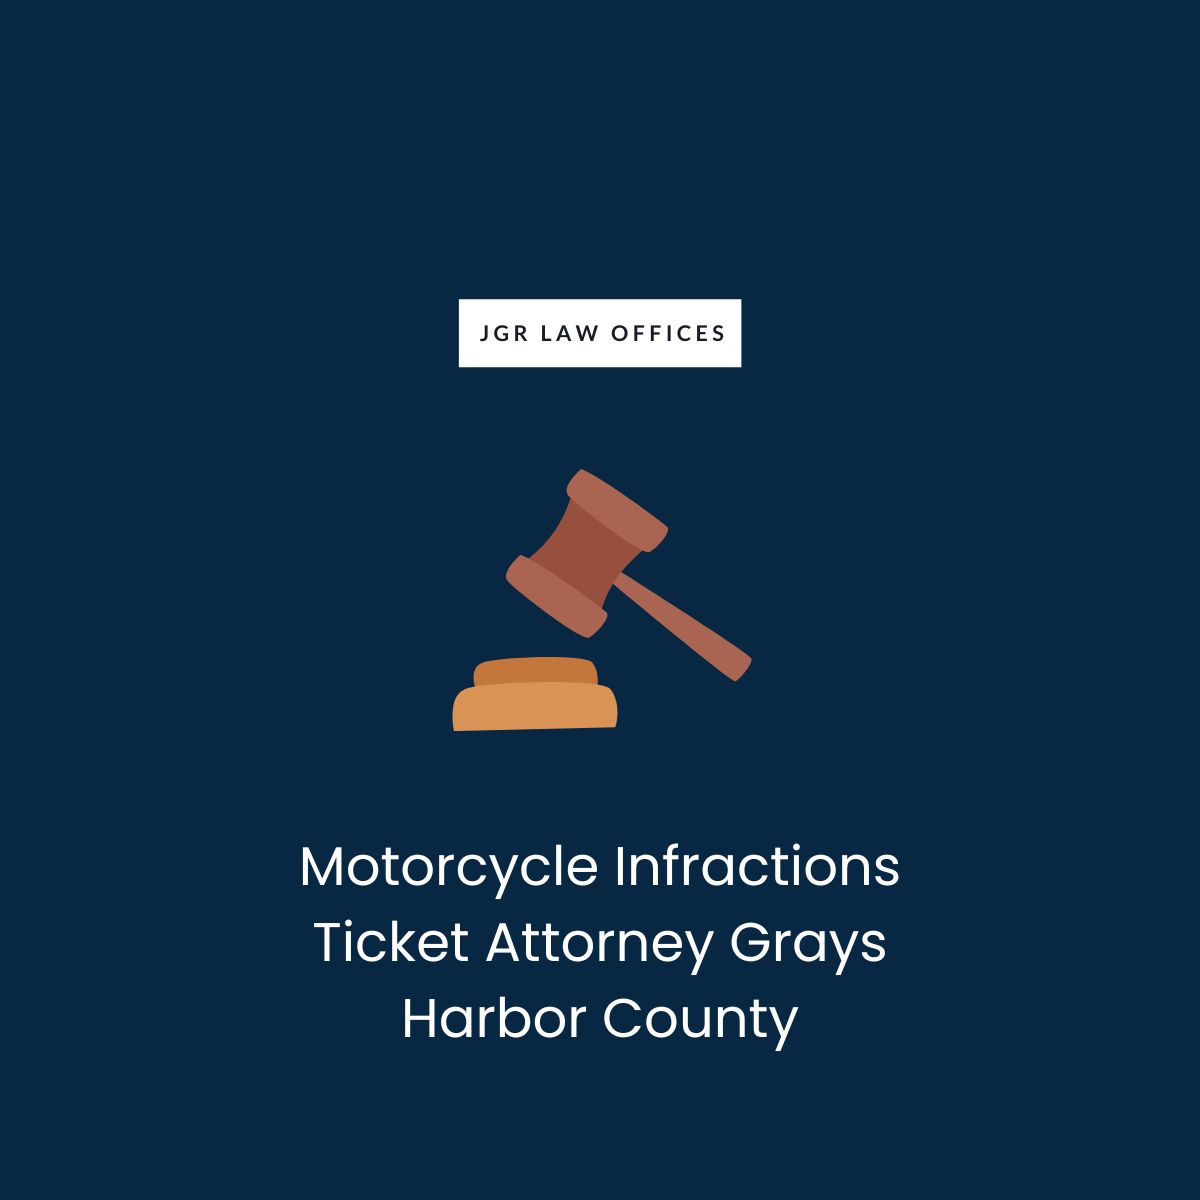 Motorcycle Infractions Ticket Attorney Grays Harbor County